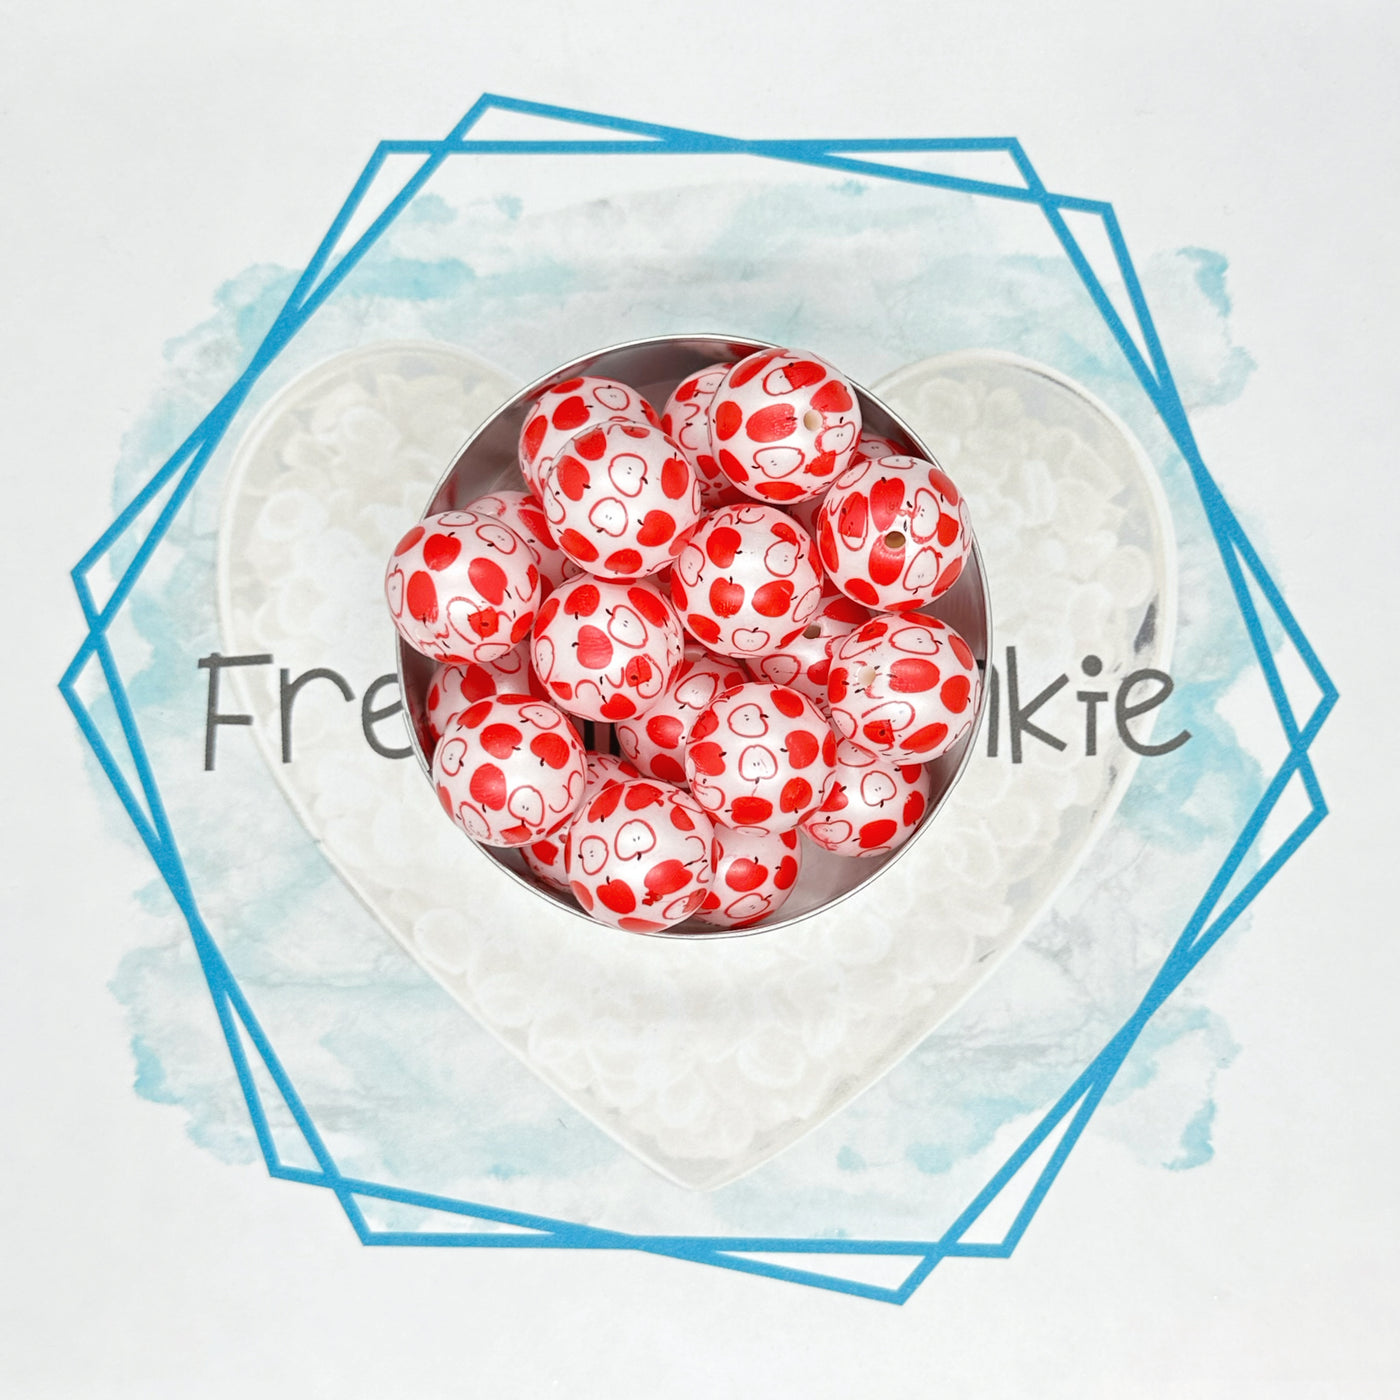 Small Unscented Aroma Beads Freshie Starter Kit (Makes 12-20 freshies)